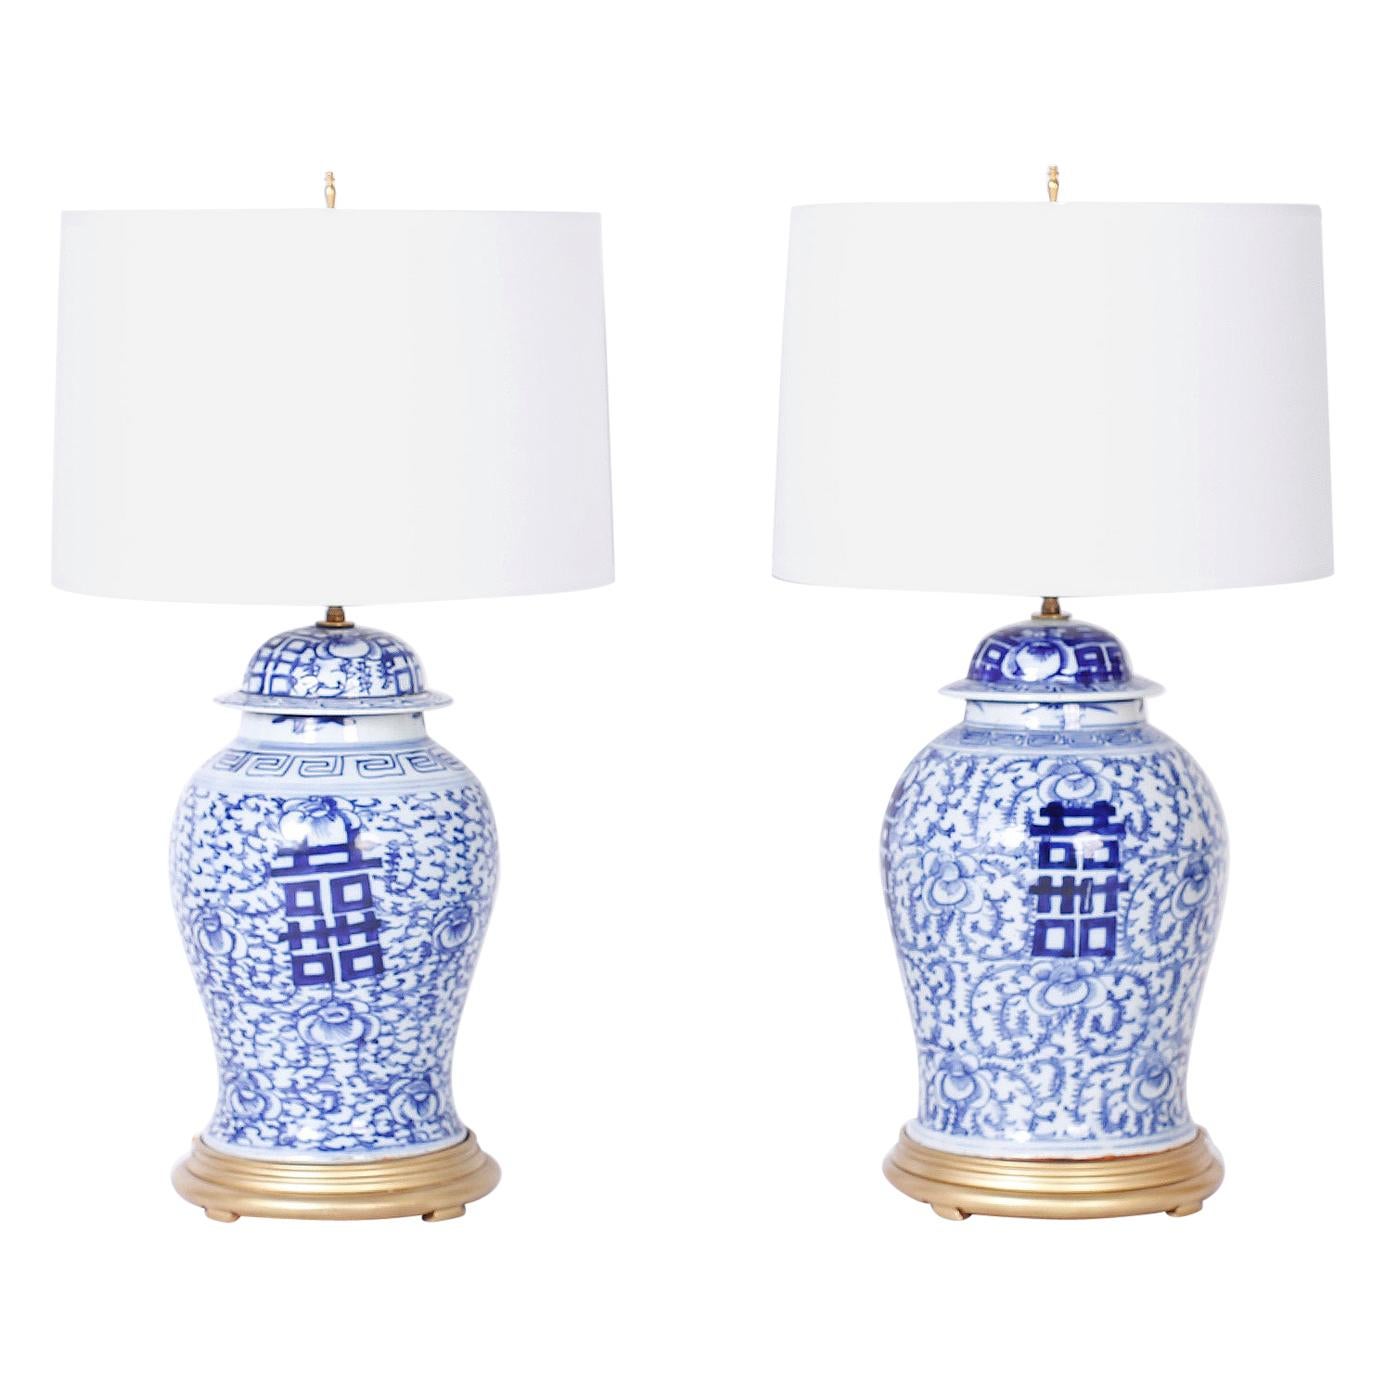 Pair of Blue and White Porcelain Happiness Jar Table Lamps